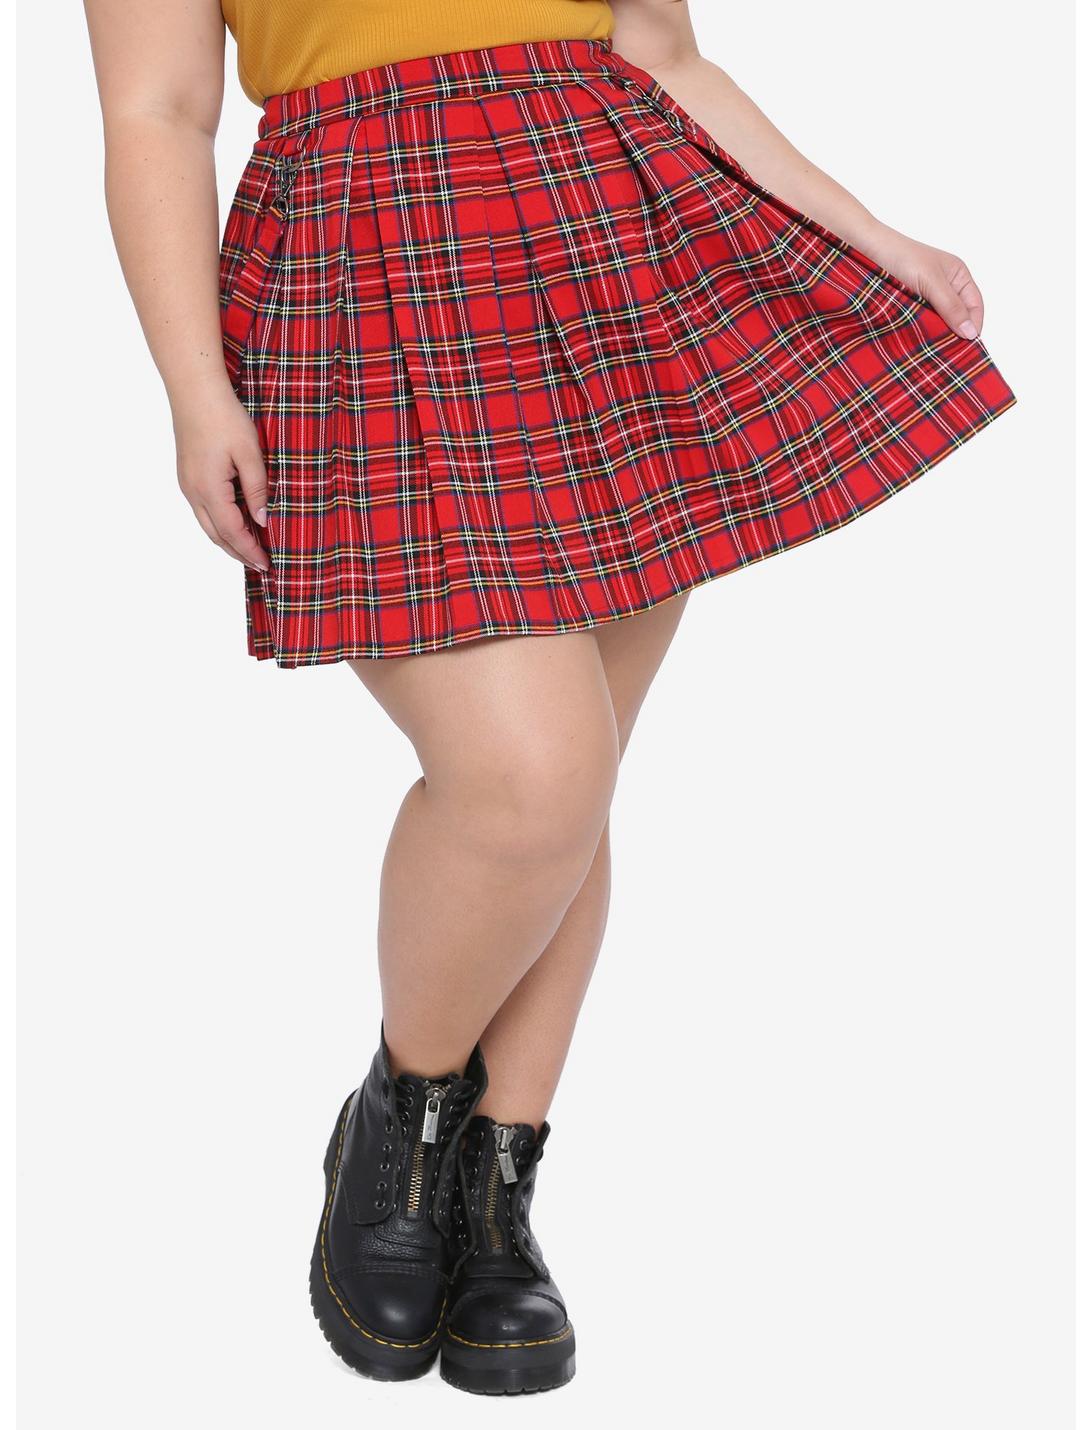 Red Plaid Pleated Suspender Skirt Plus Size | Hot Topic